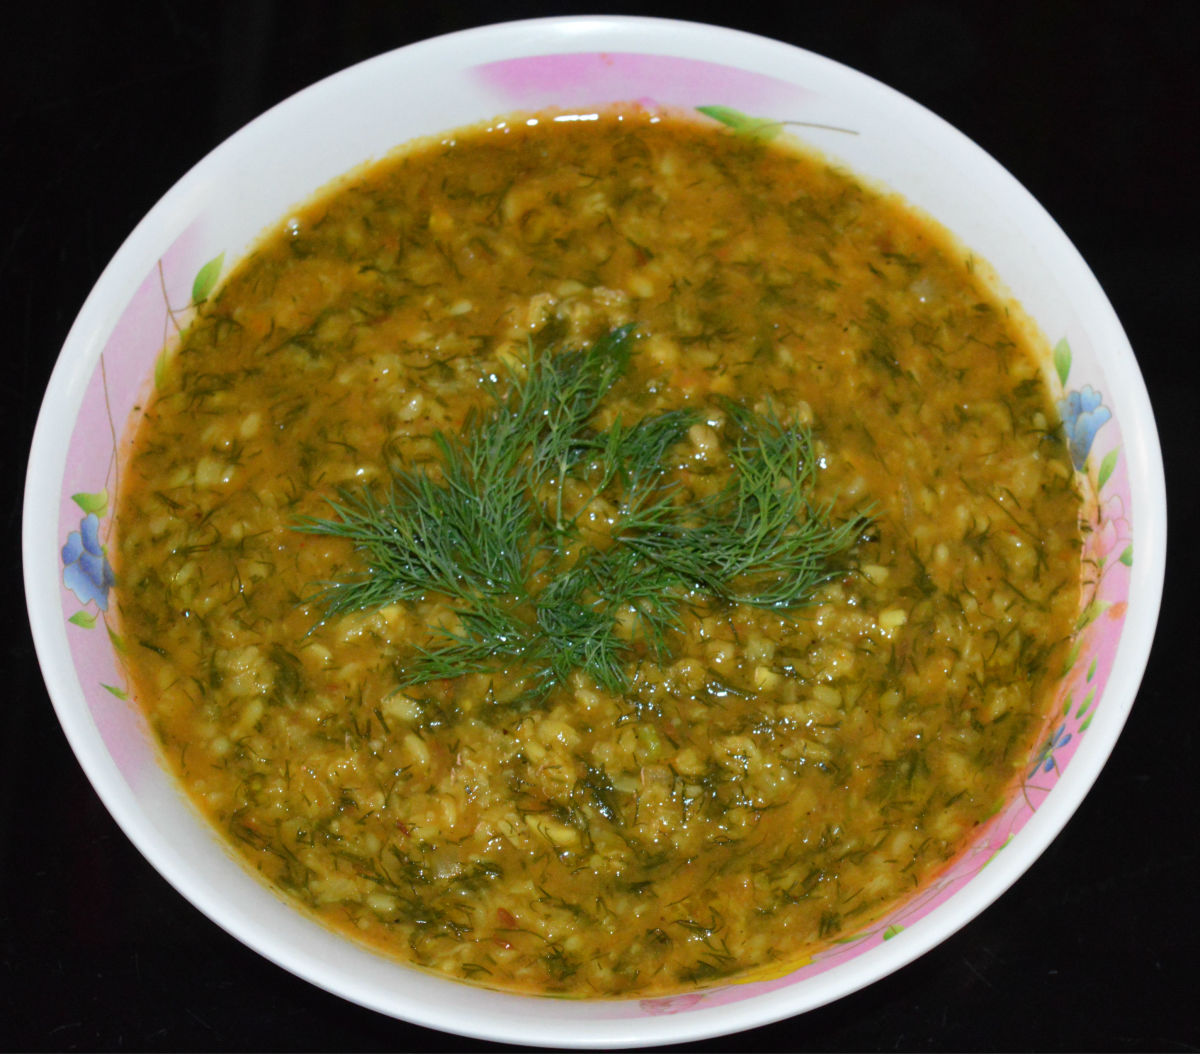 Dill Leaves and Mung Beans Curry (Moong Dal Dill Leaves Side Dish)